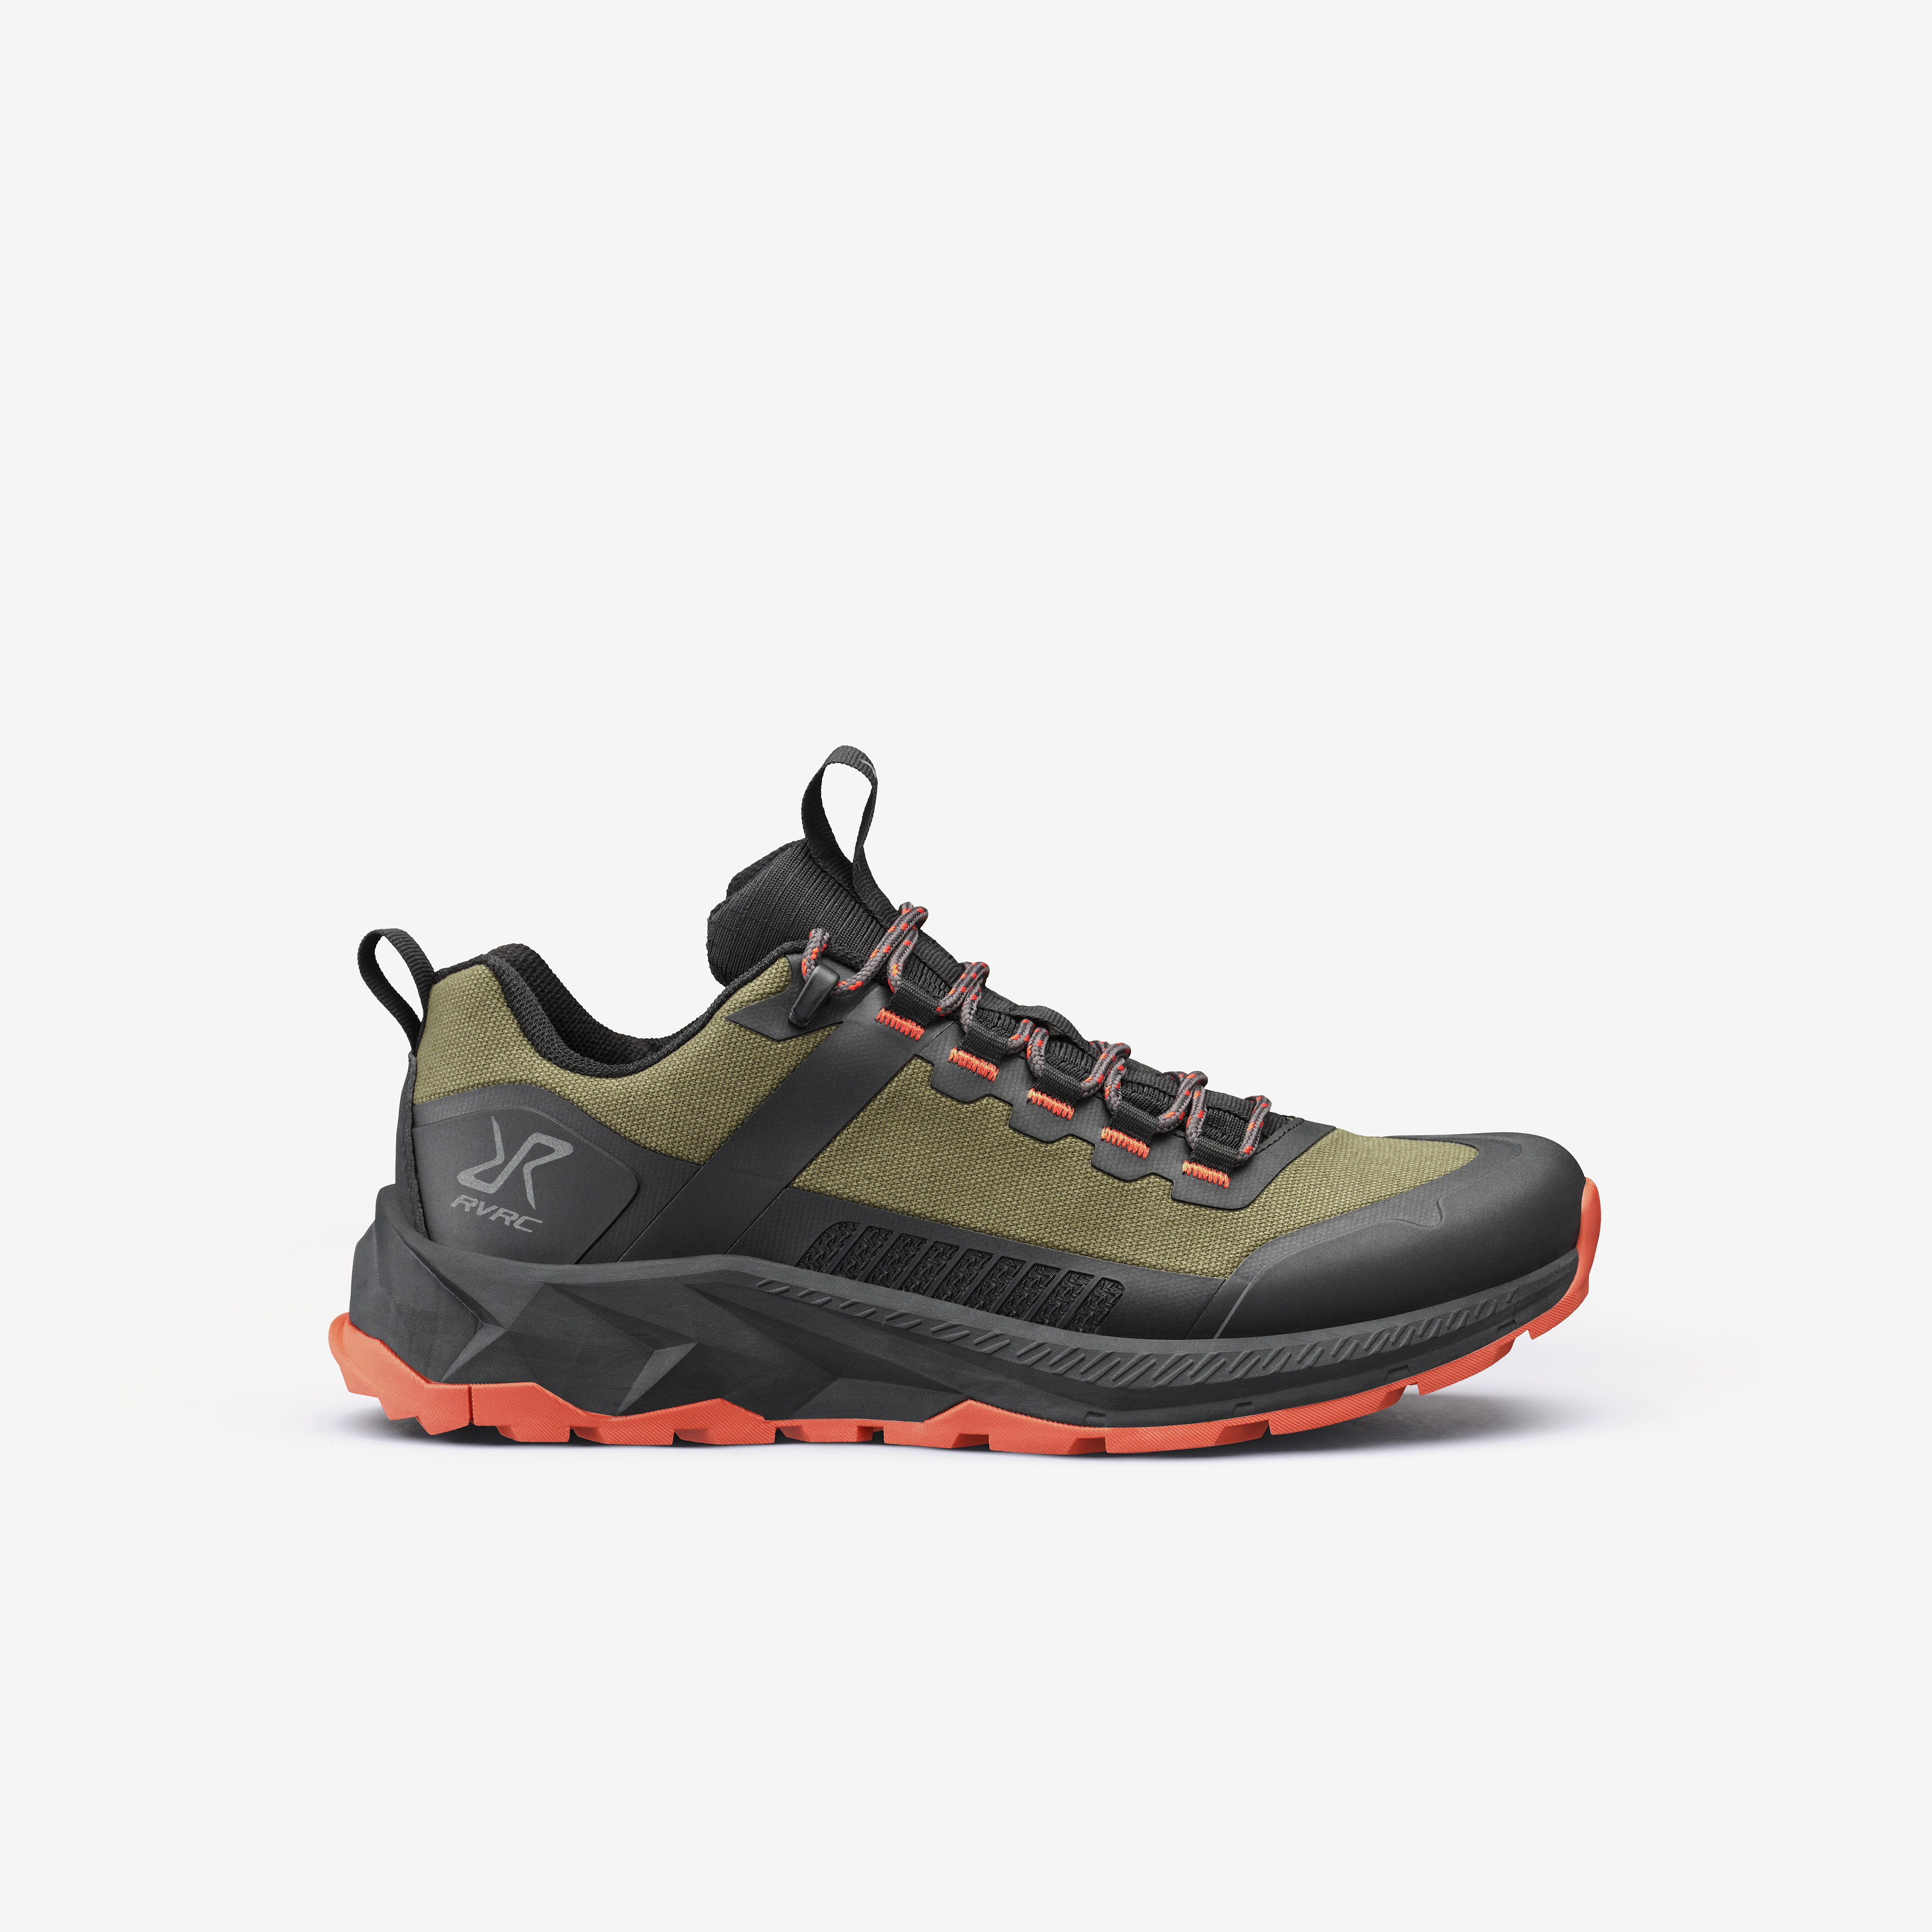 Phantom Trail Low Hiking Shoes Dark Olive Hombres